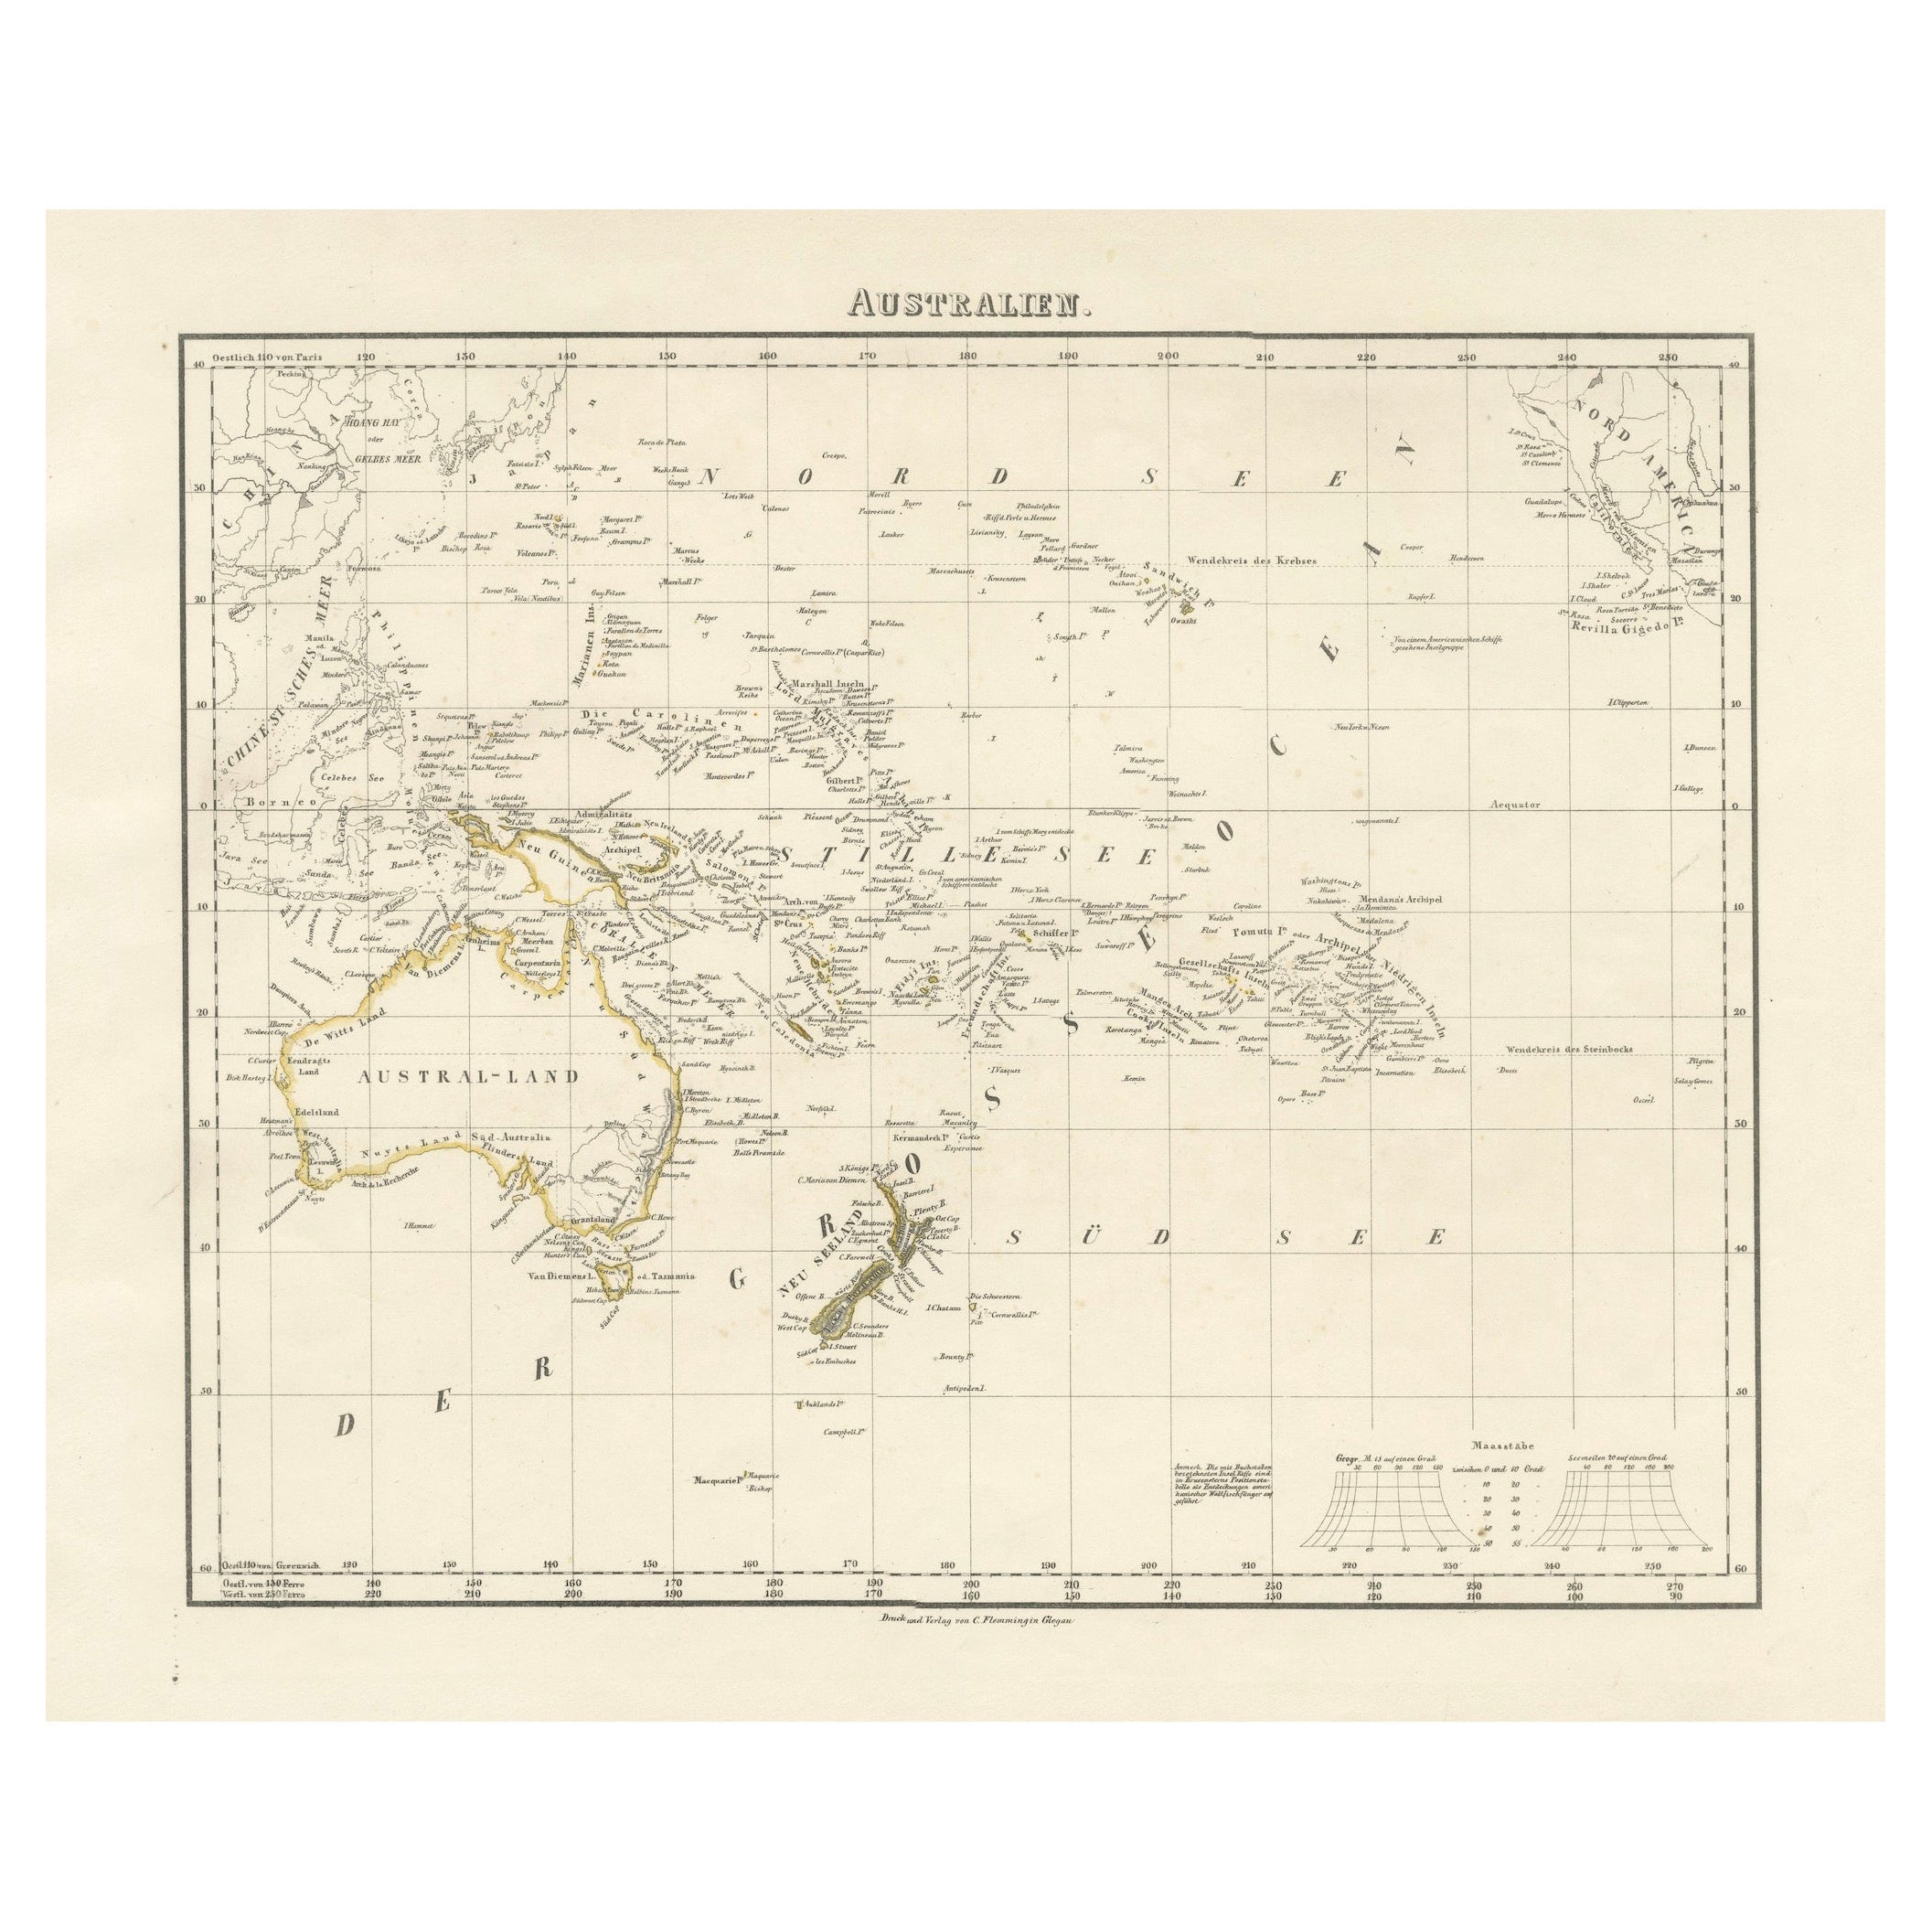 Title: Mid-19th Century Map of Australasia by Carl Flemming - 1855